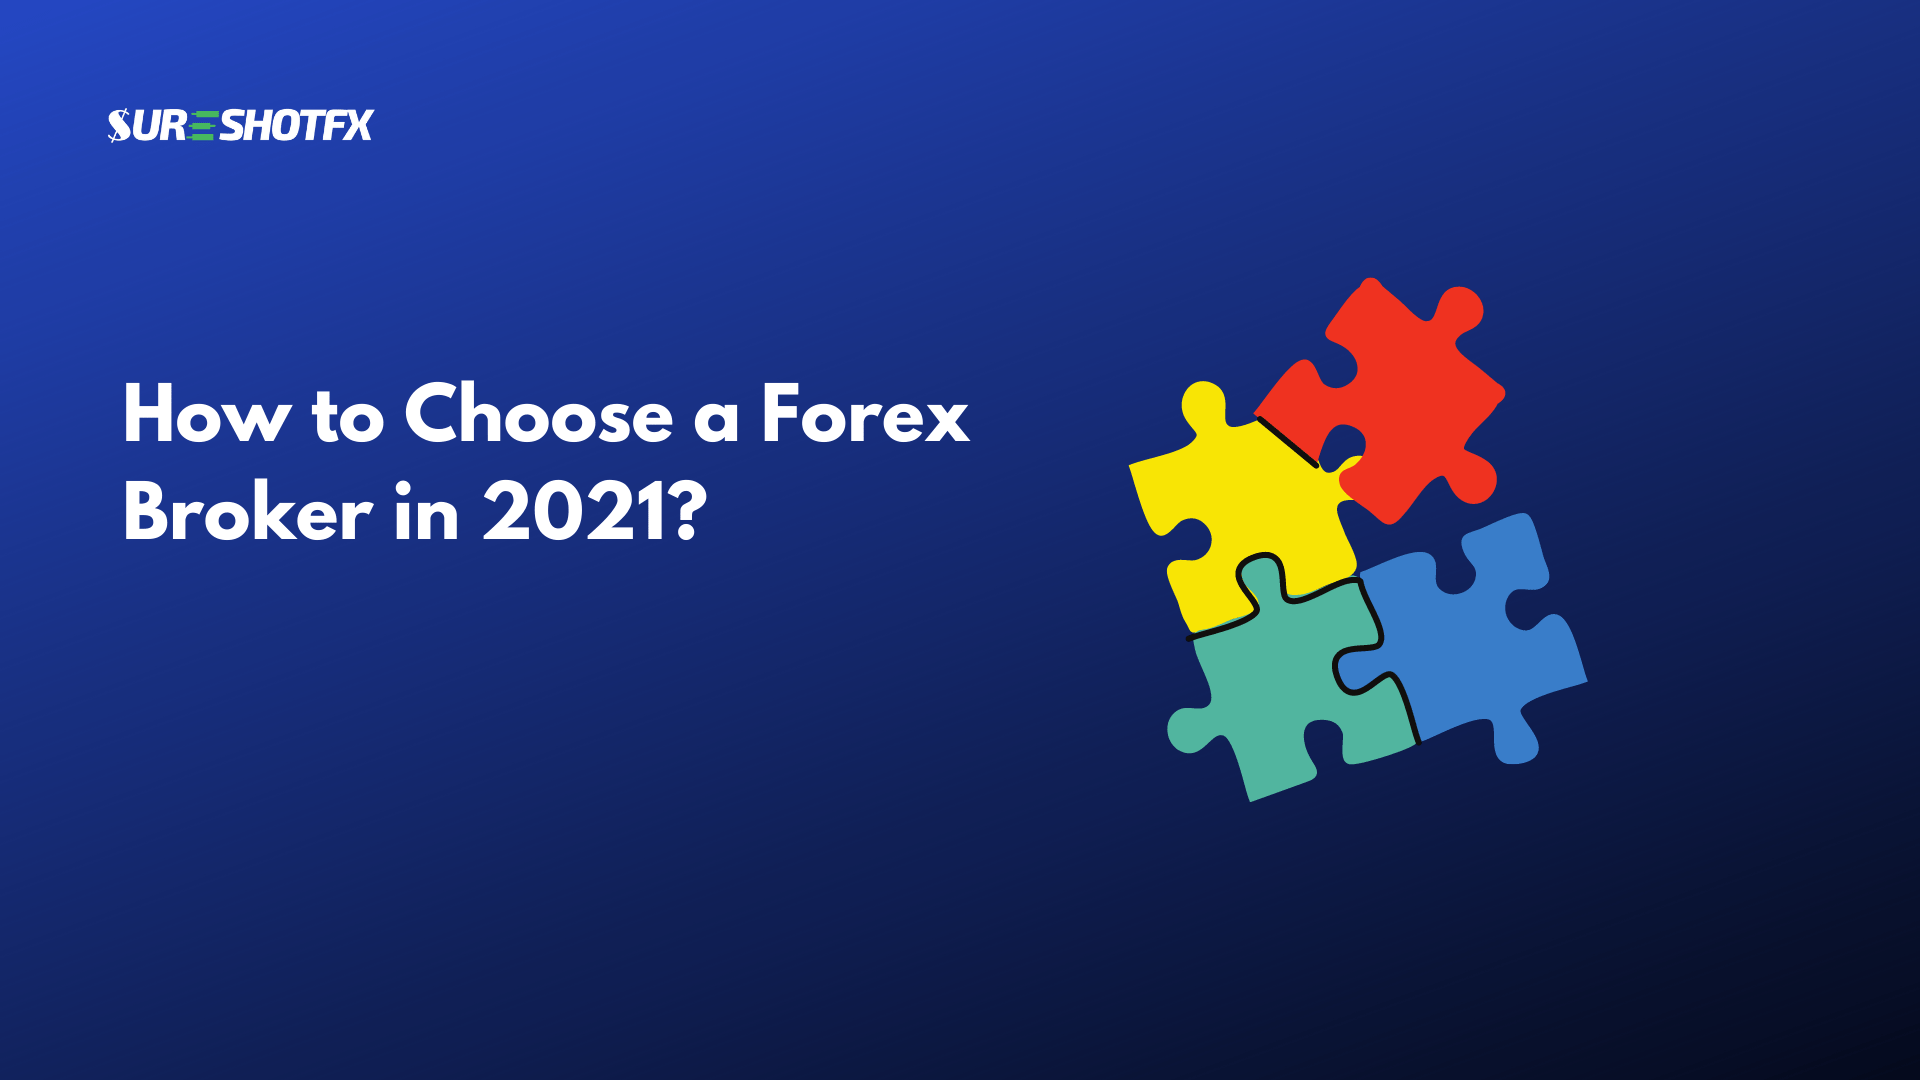 How to Choose a Forex Broker in 2021? – SureShotFX